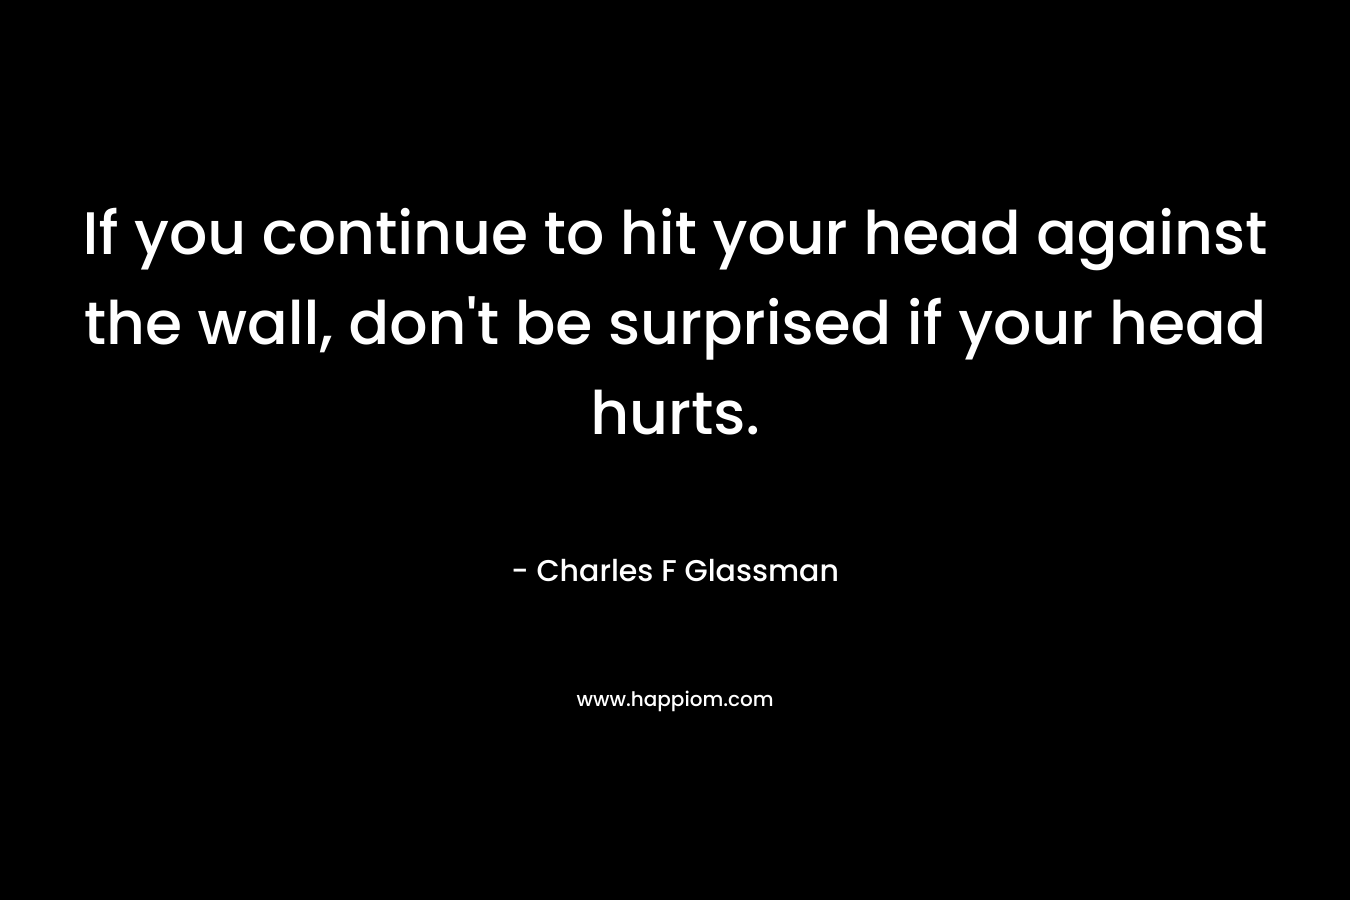 If you continue to hit your head against the wall, don't be surprised if your head hurts.